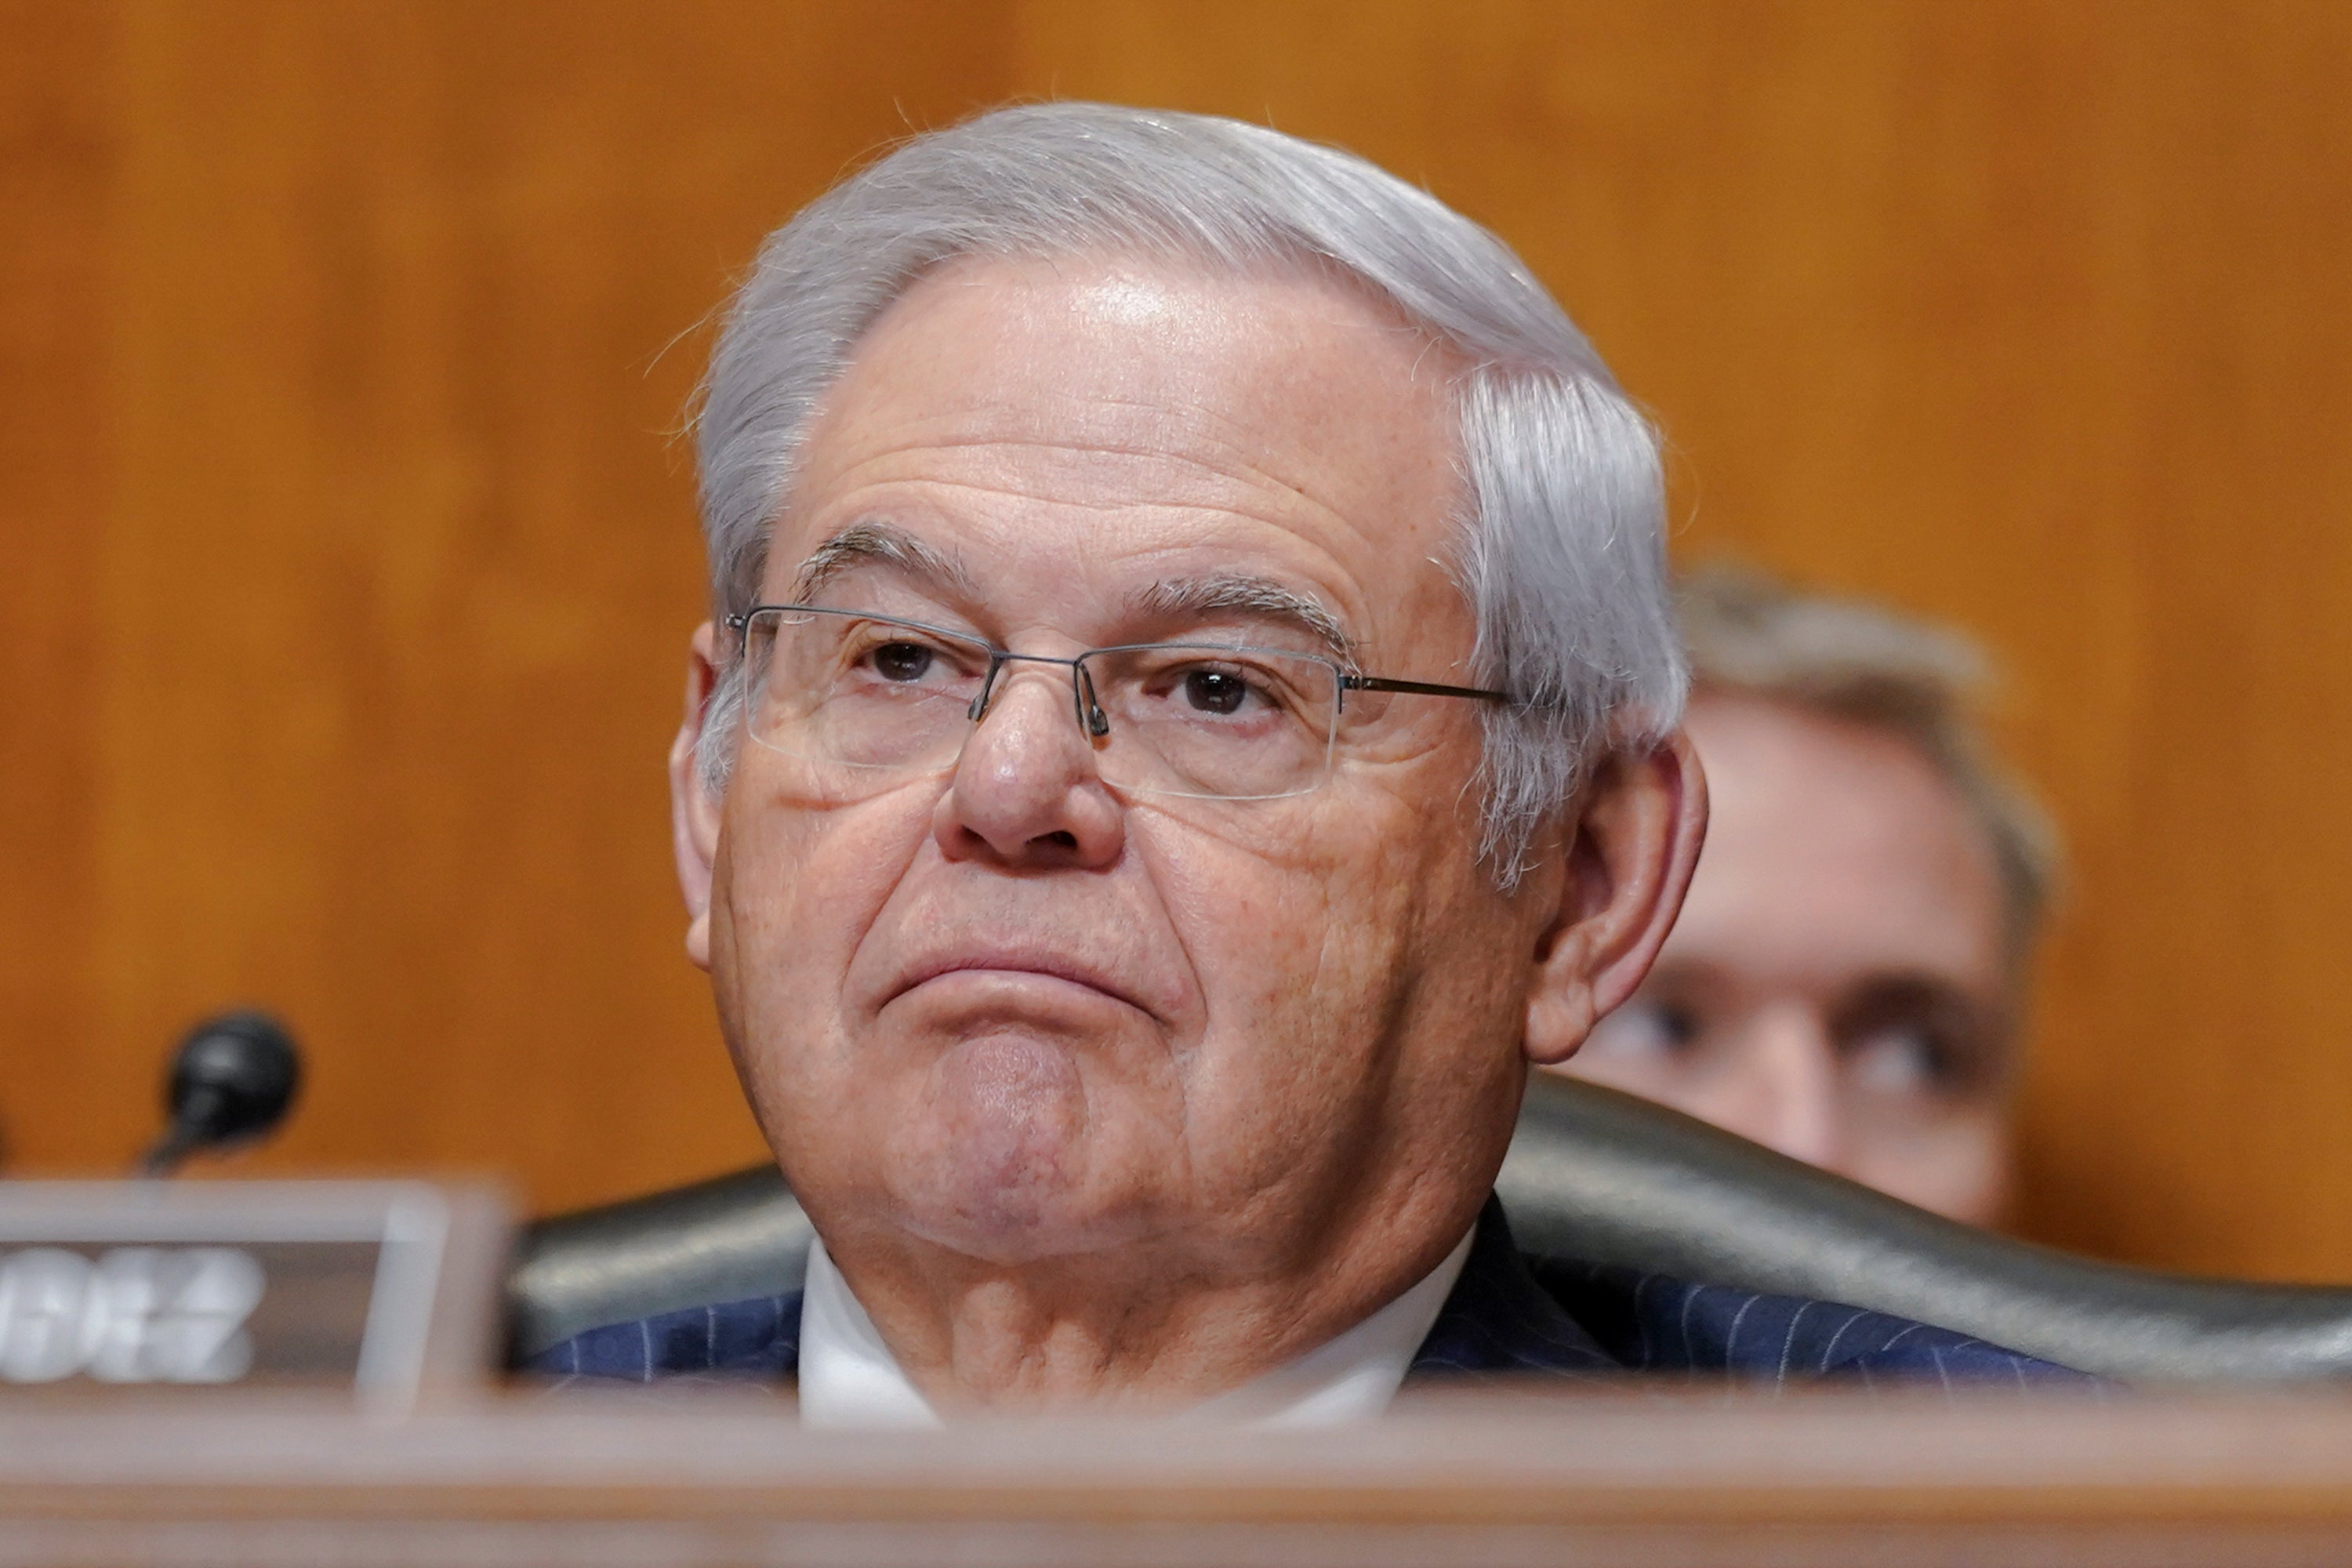 Lawyers for Robert Menendez filed a dismissal motion on 10 January